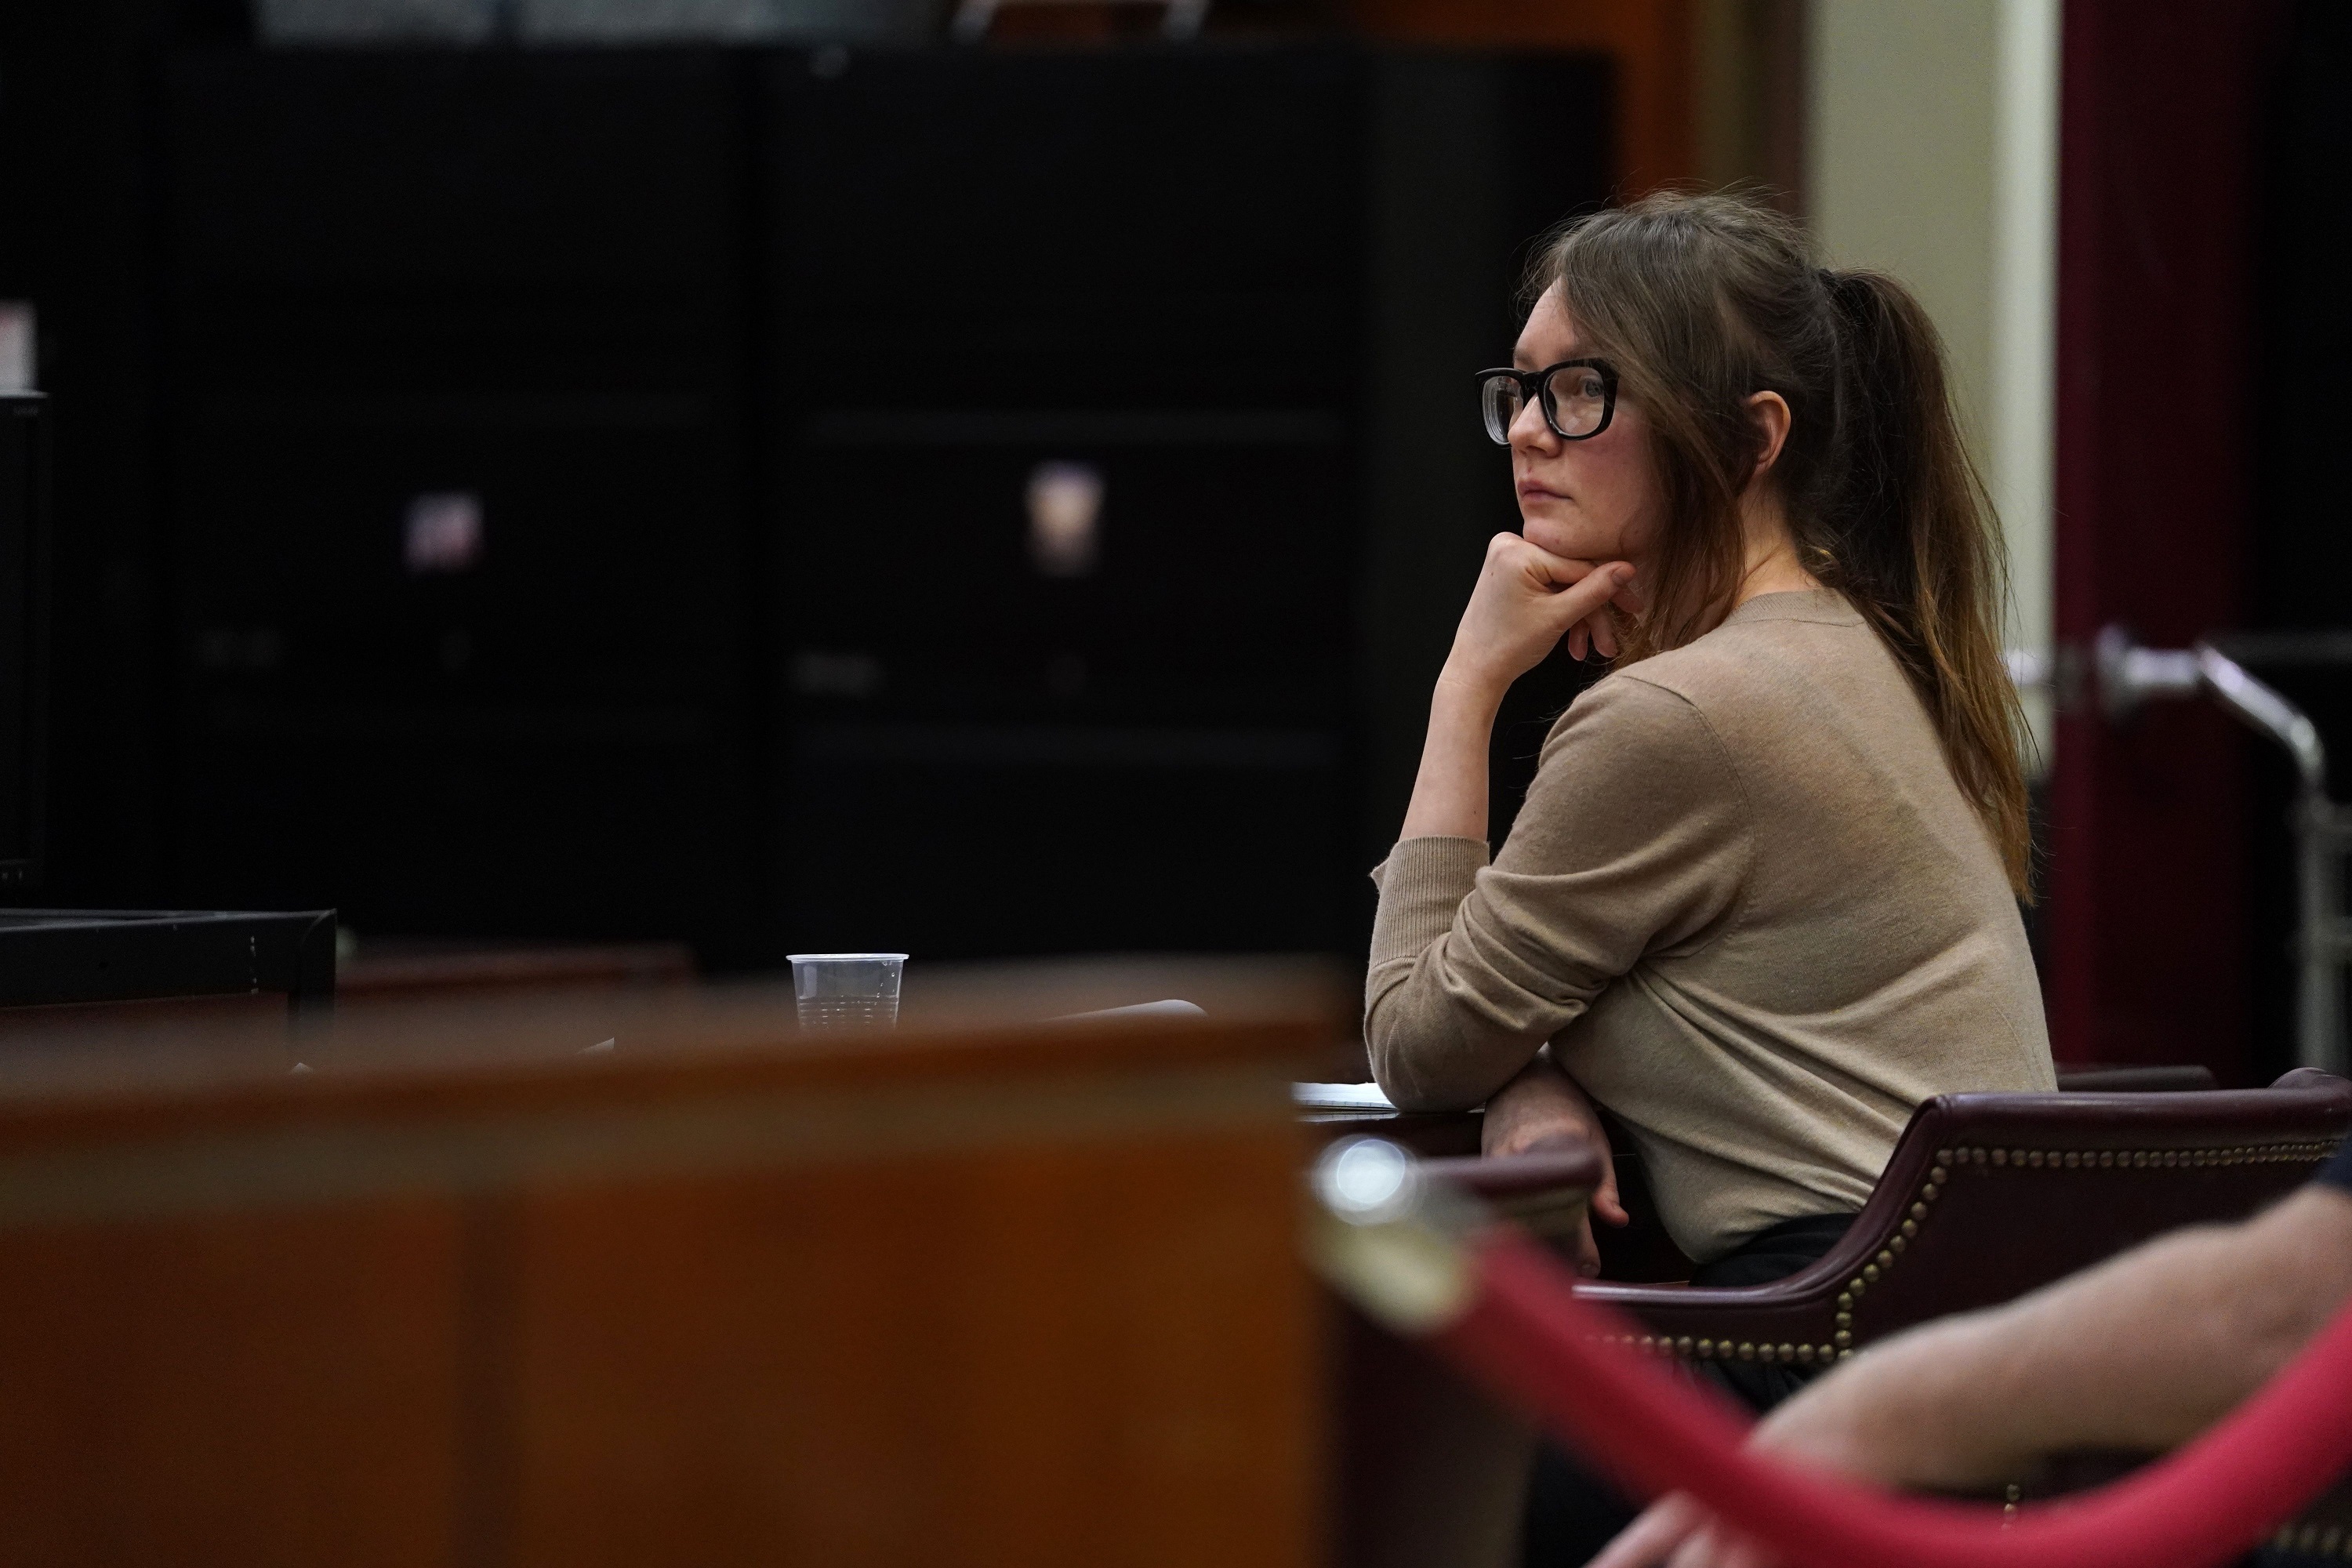 Anna Sorokin (aka Anna Delvey) sits in a courtroom leaning her chin on her hand.